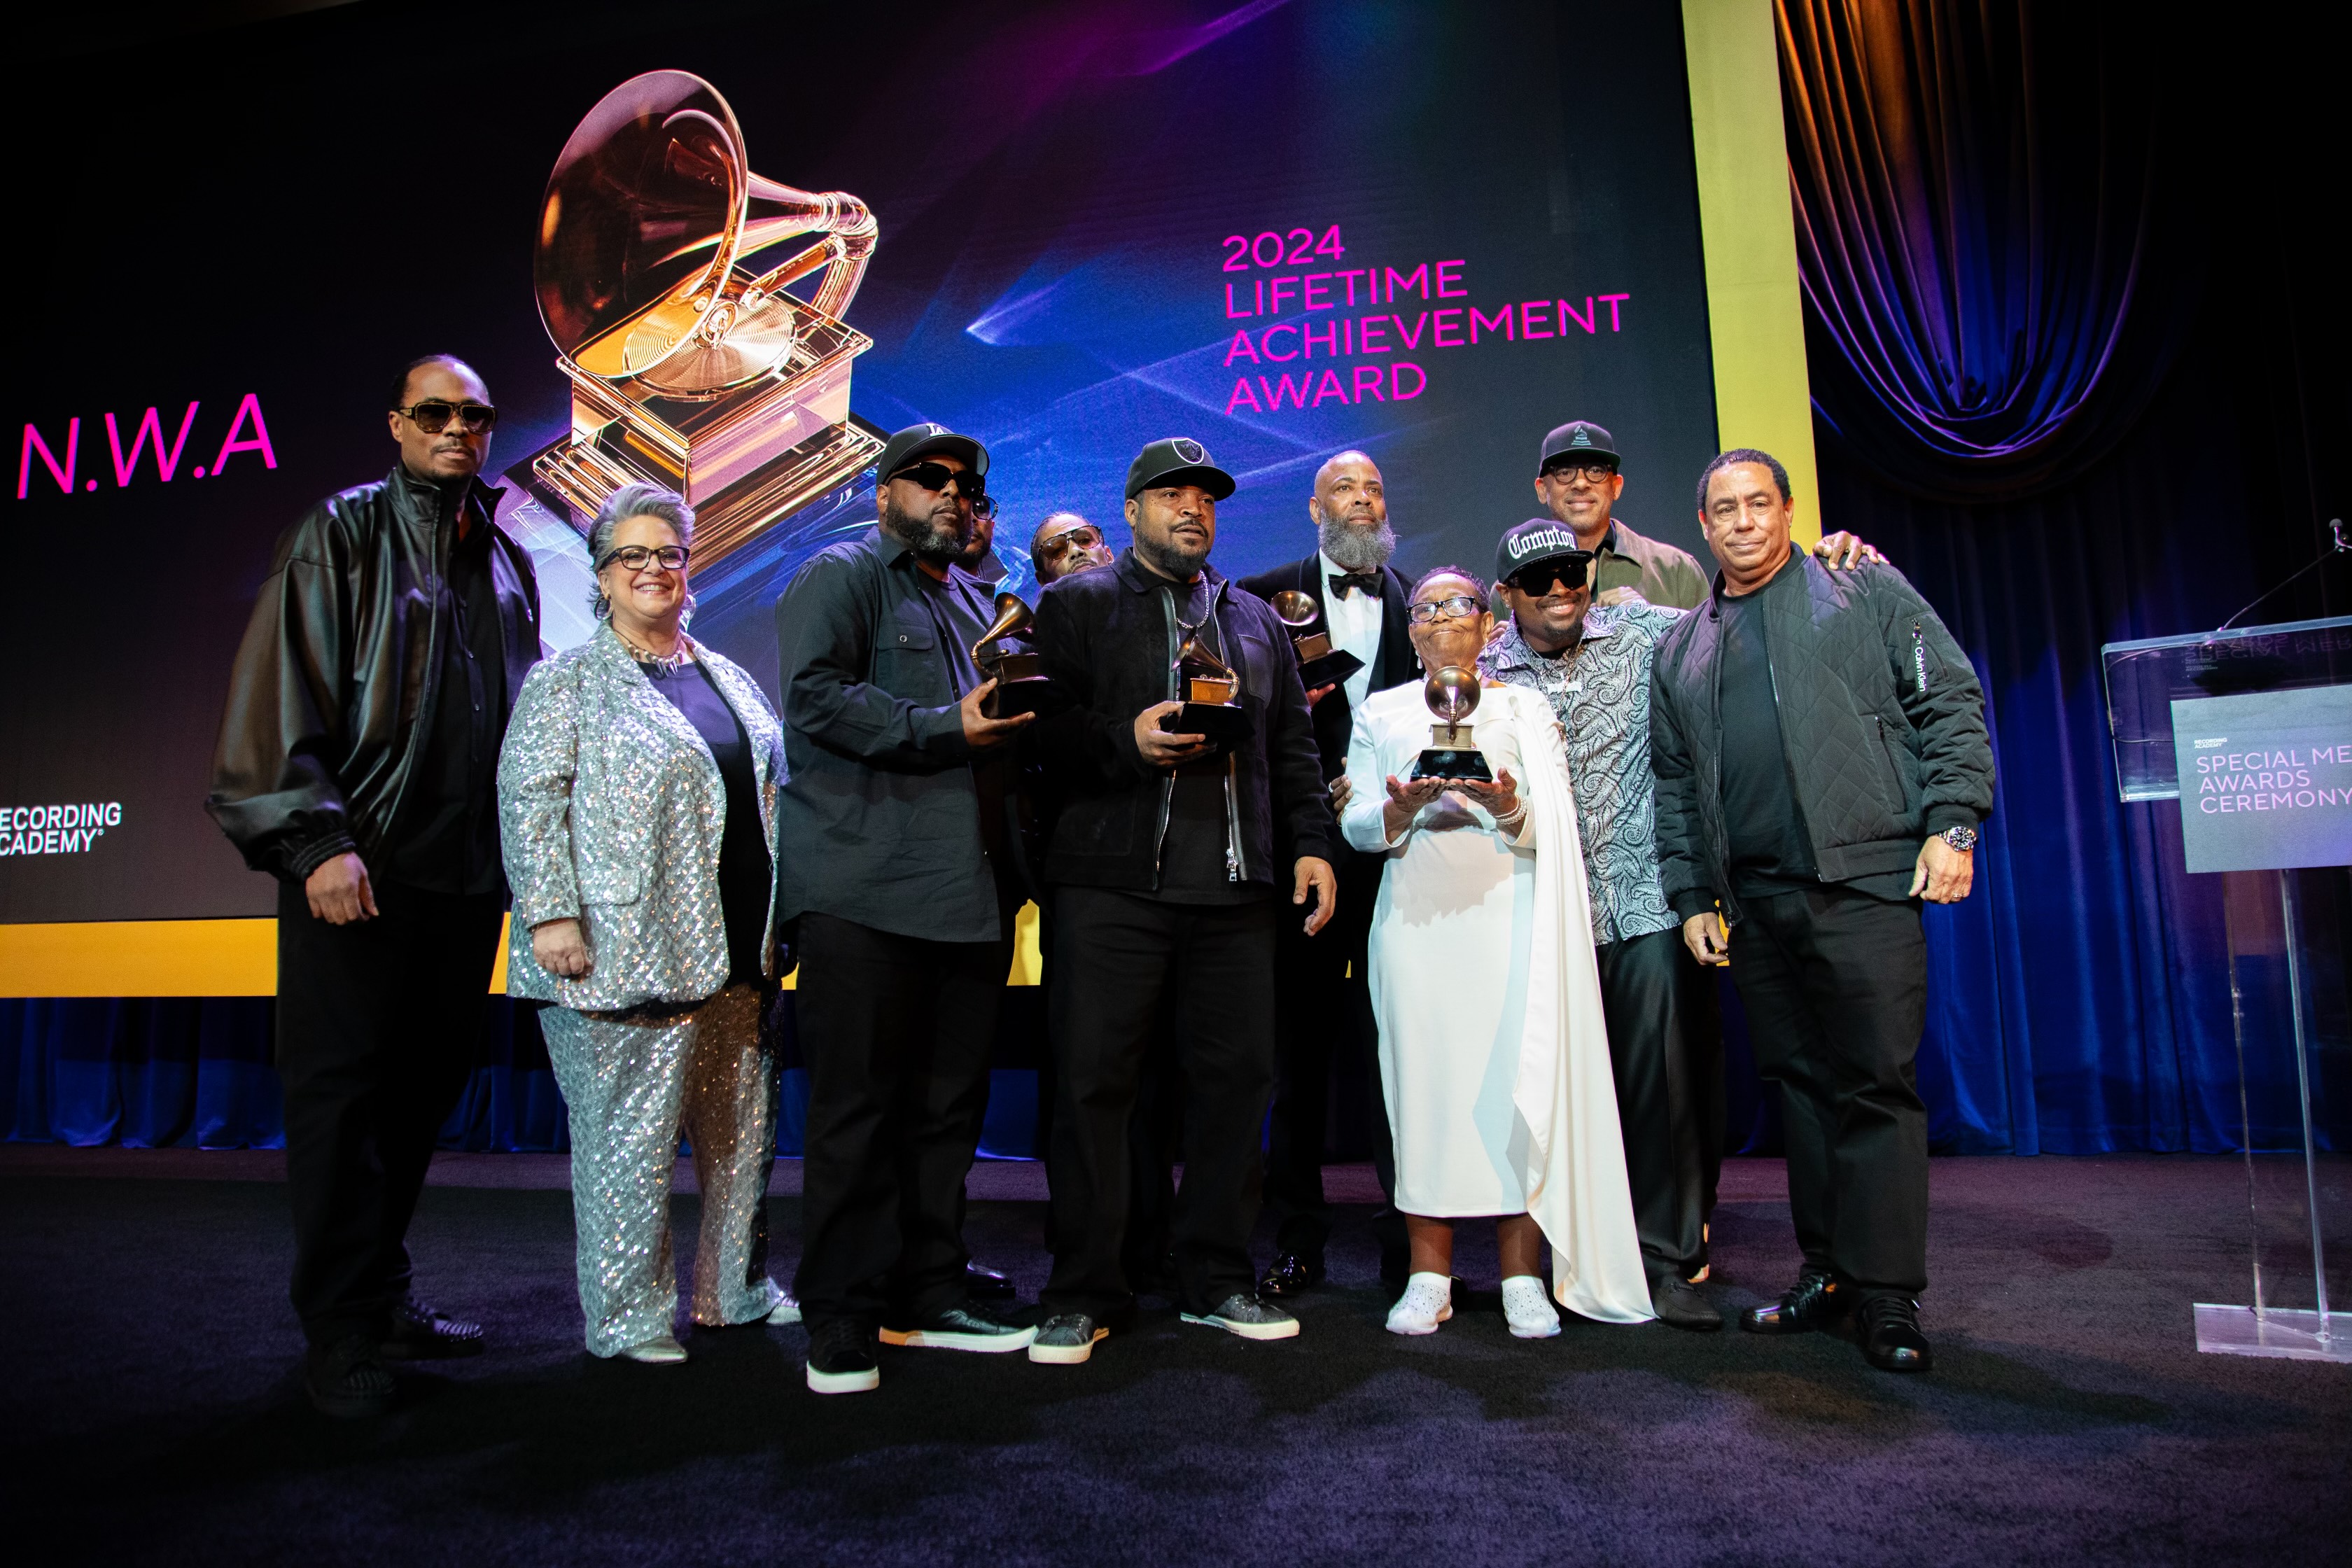 Bone Thugs-N-Harmony Honors N.W.A with Lifetime Achievement Award At 2024 Grammys